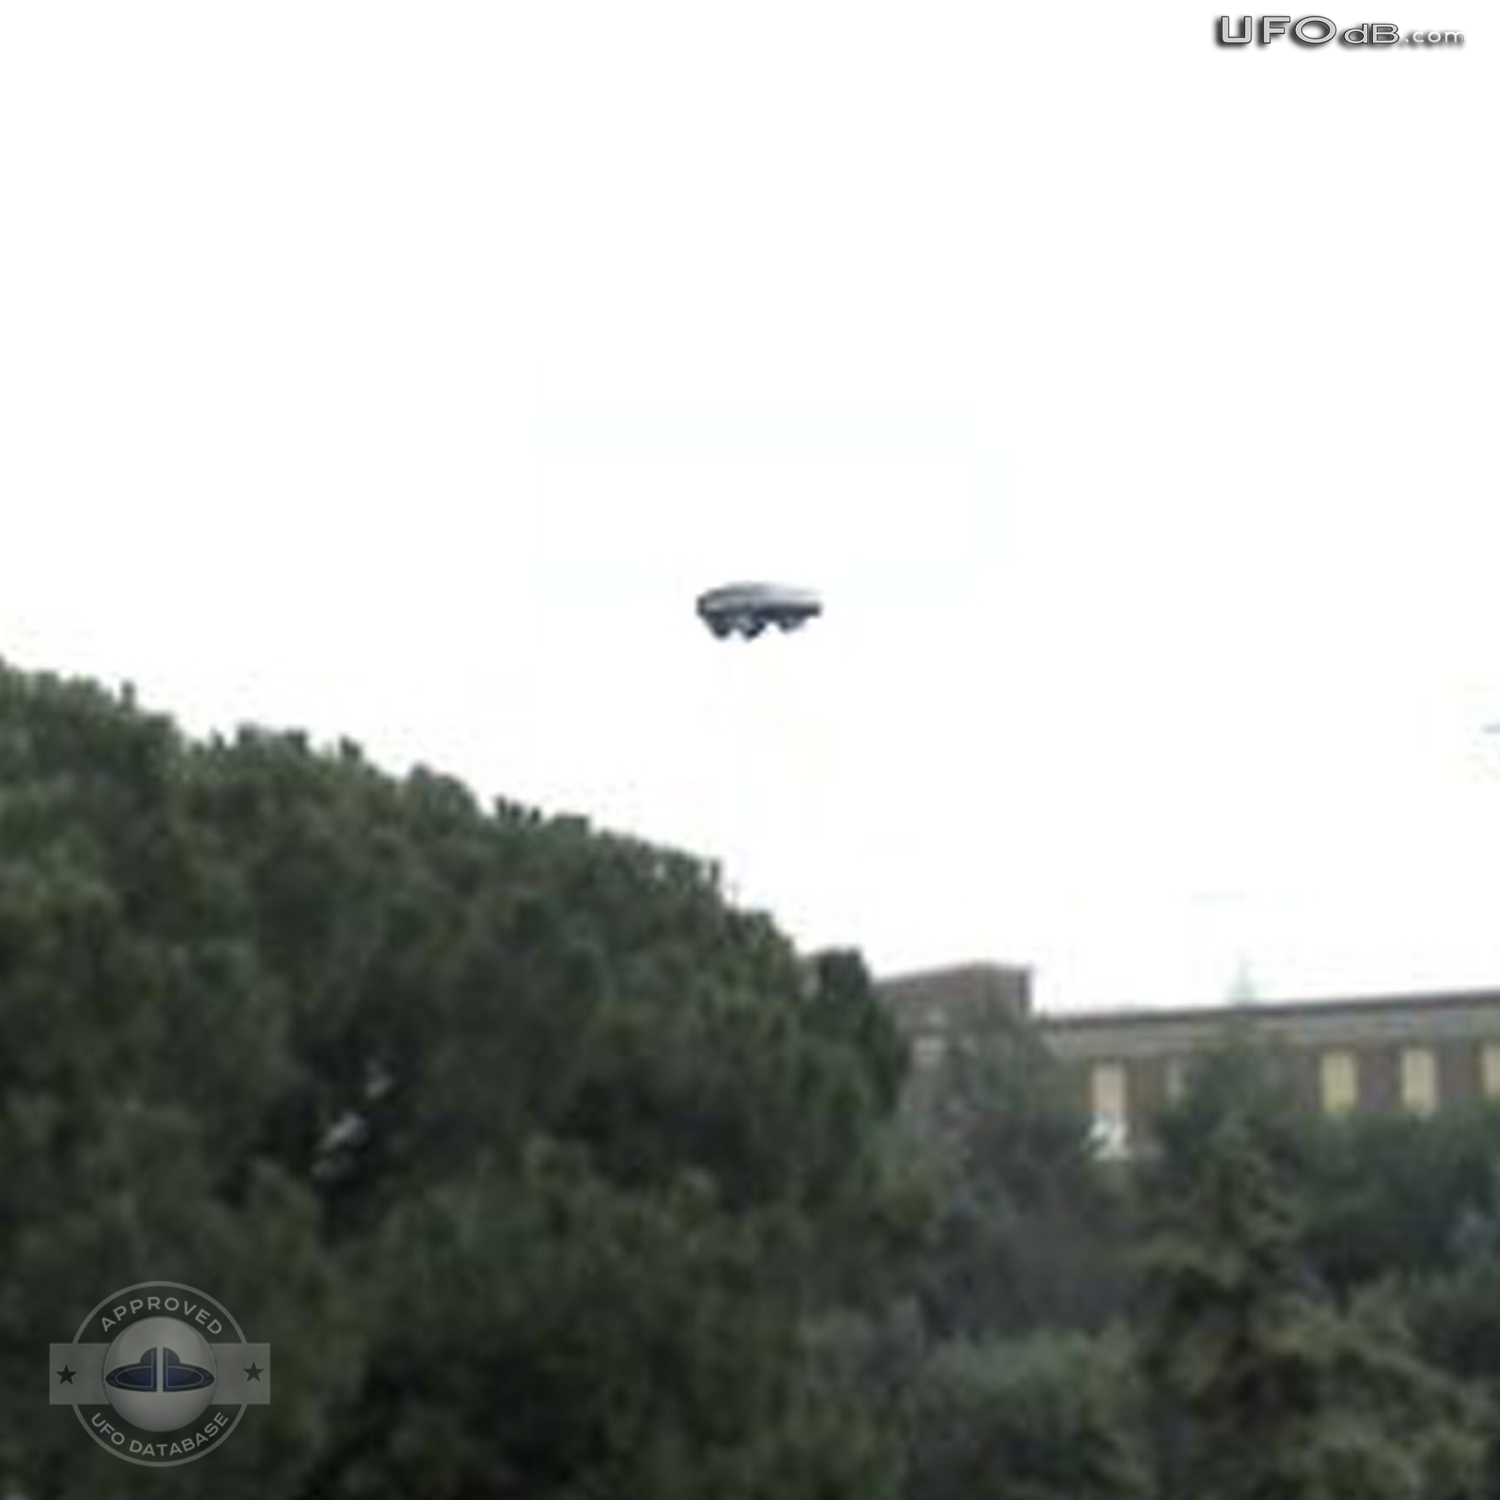 Very Strange UFO caught on picture over Rome | Italy | January 19 2011 UFO Picture #312-2